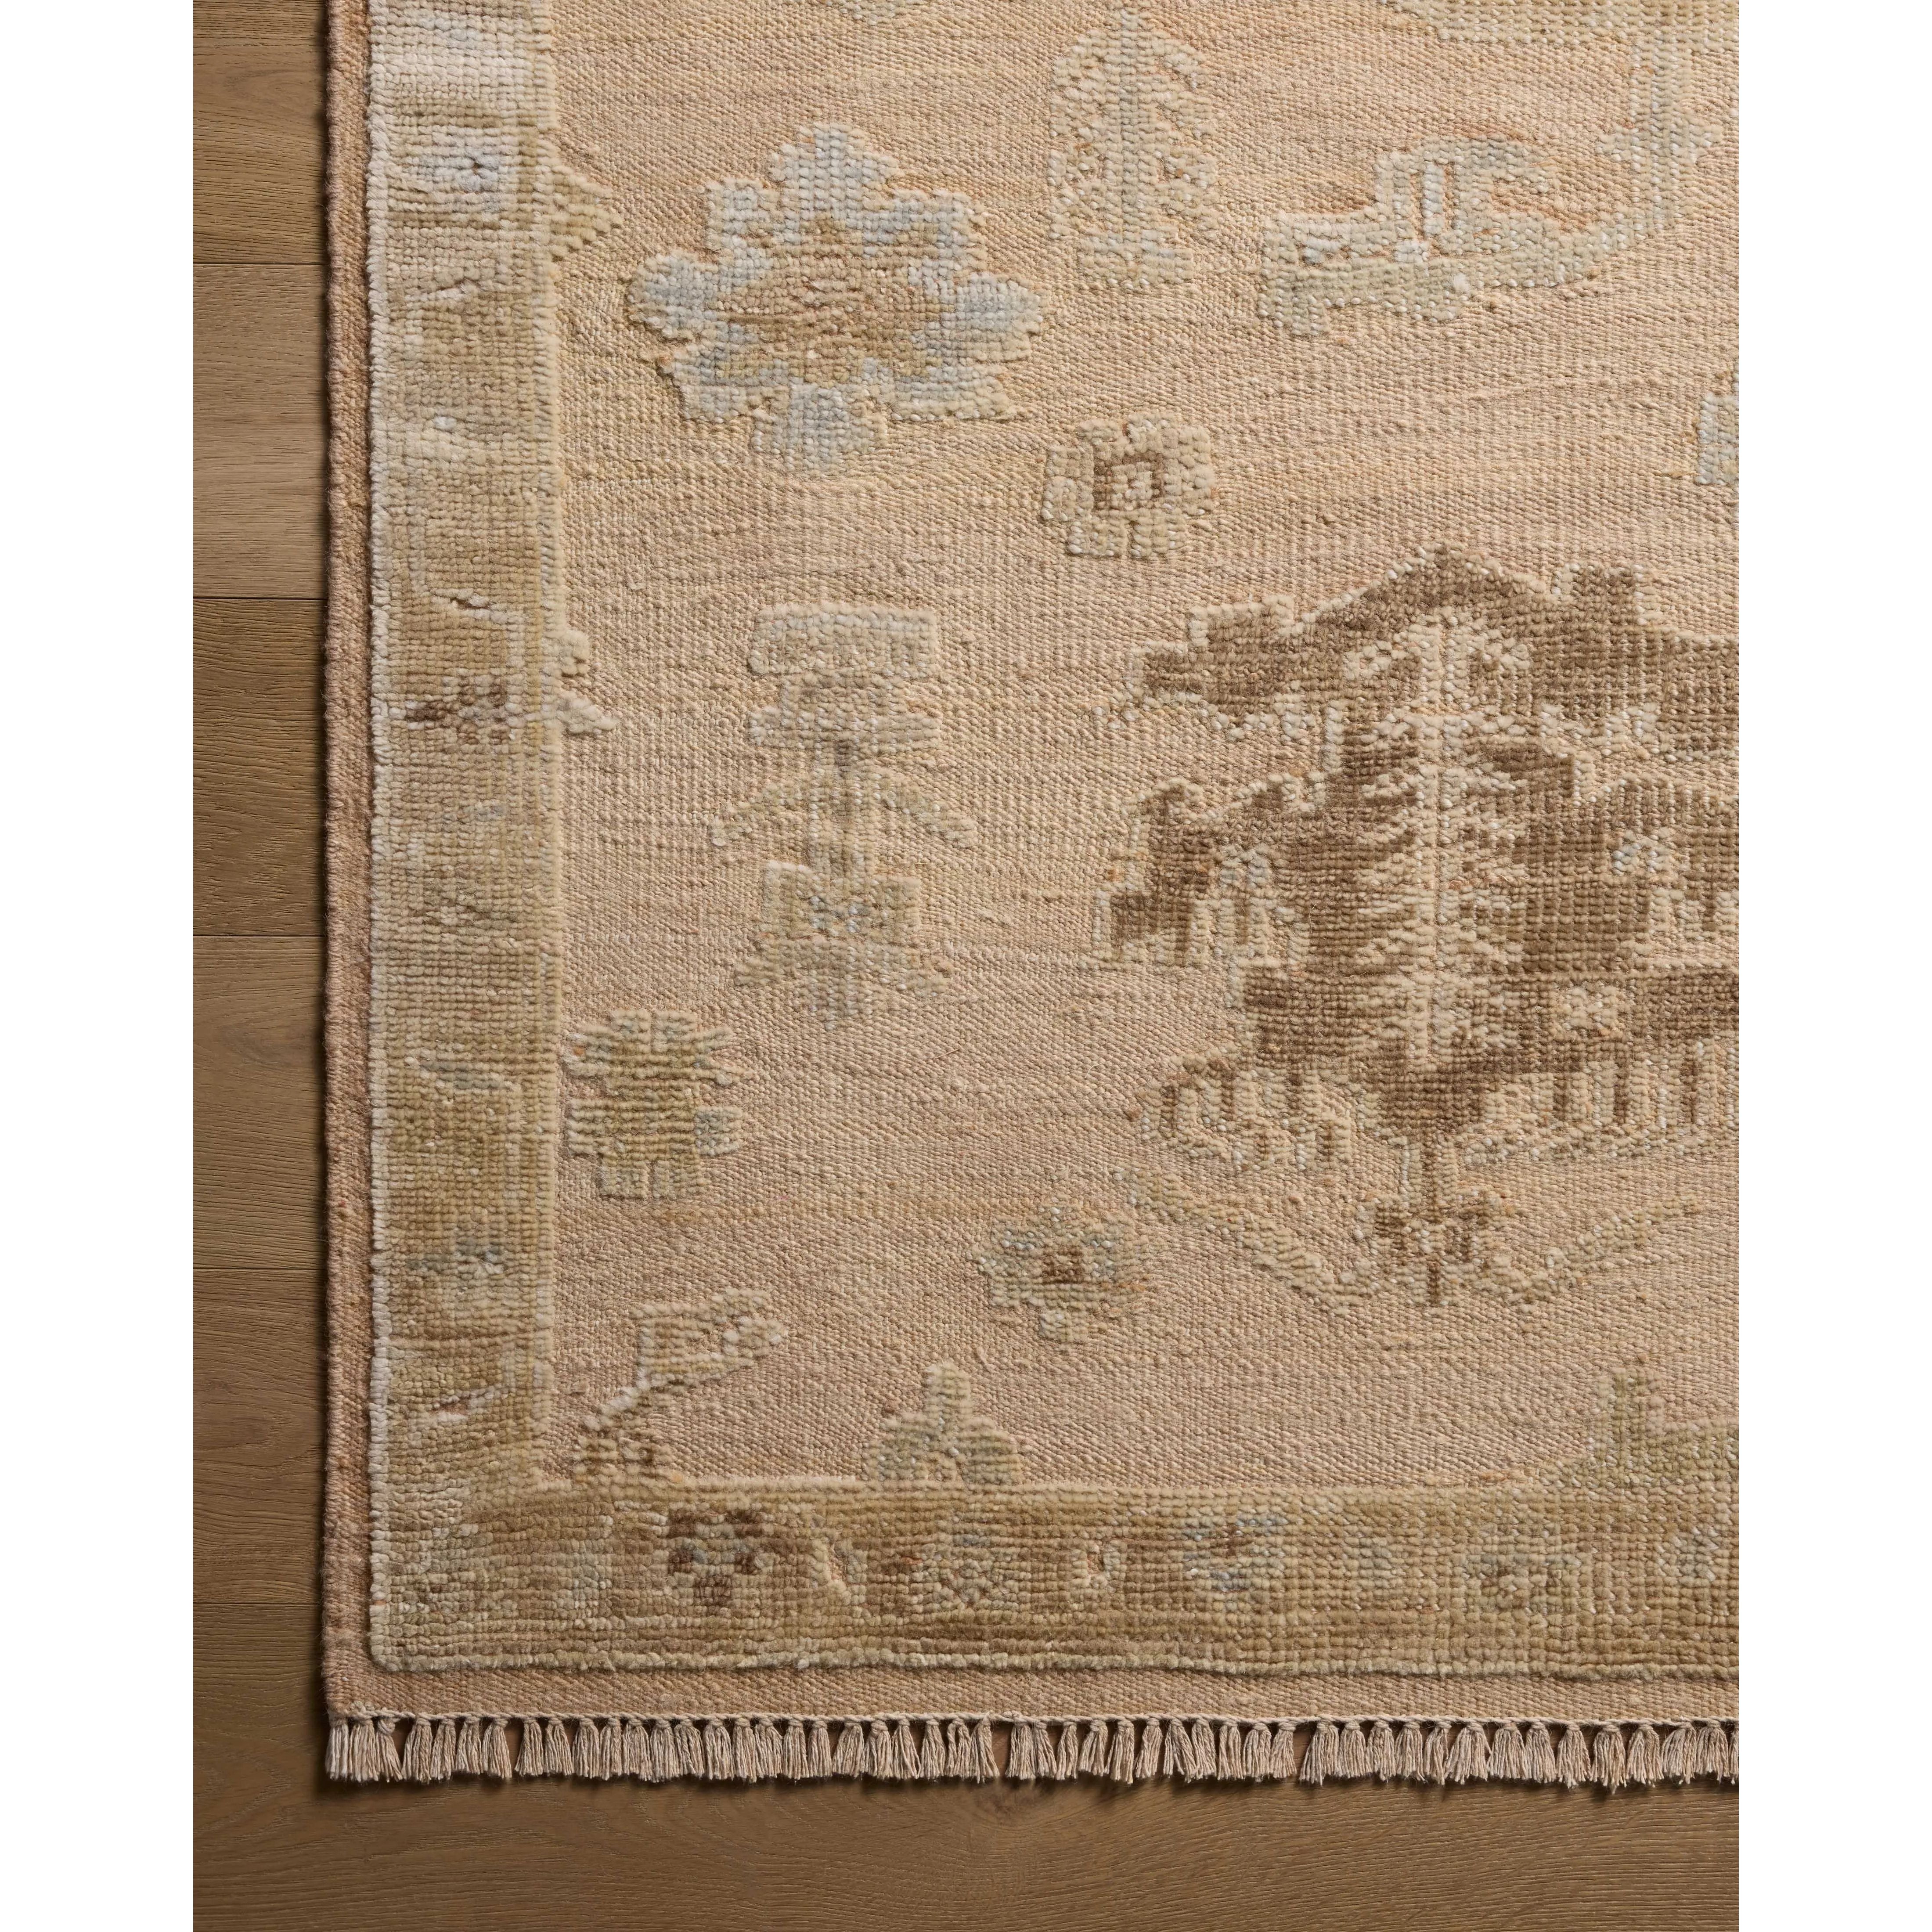 The Marianne Collection is a hand-knotted wool area rug with vintage medallion motifs and short edge fringe, inspired by many one-of-a-kind pieces. The rugâ€™s elegantly neutral palette feels modern, while the rugâ€™s overall aesthetic is timeless. Amethyst Home provides interior design, new home construction design consulting, vintage area rugs, and lighting in the Winter Garden metro area.